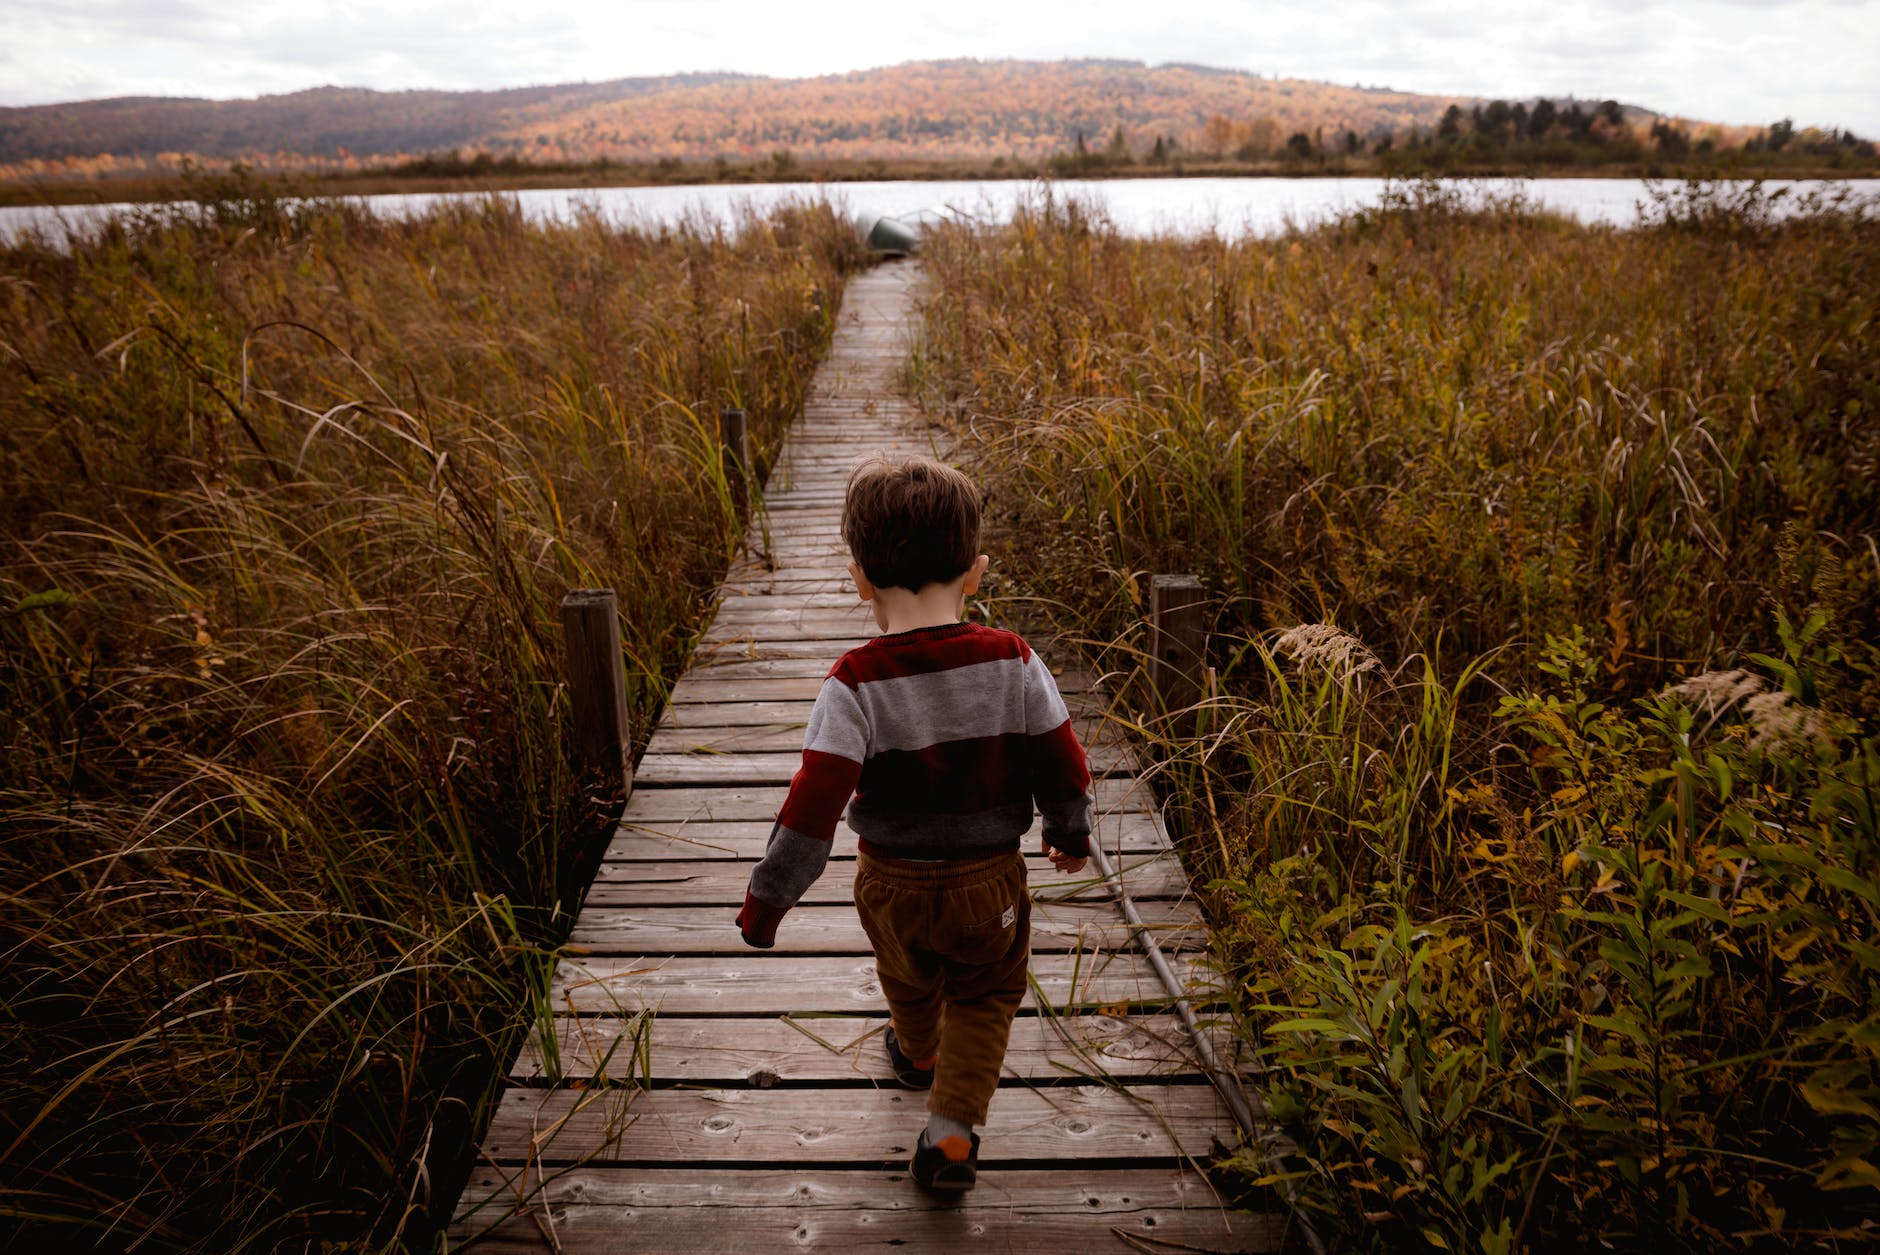 boy walking on wooden pathway beside plants during day